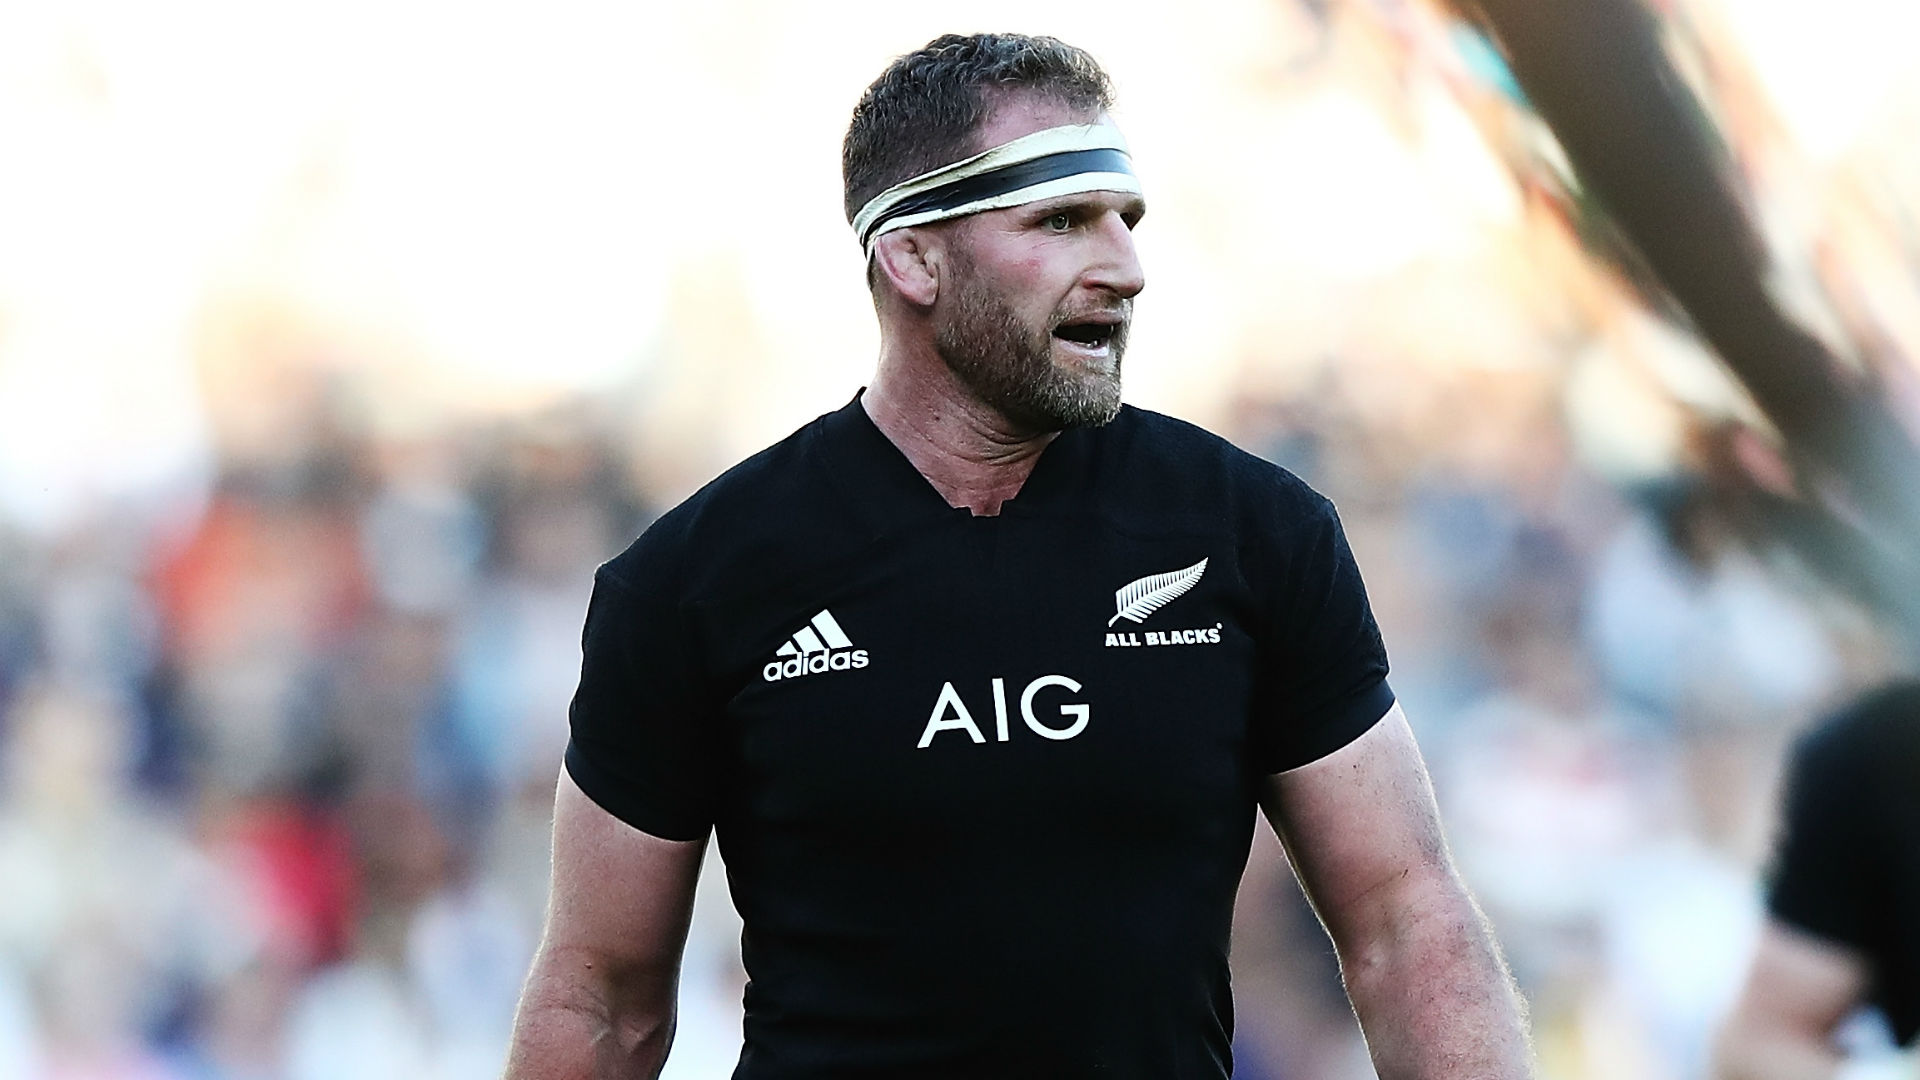 According to former Rugby World Cup captain Sam Warburton, Kieran Read is cut out to lead New Zealand to glory in Japan.